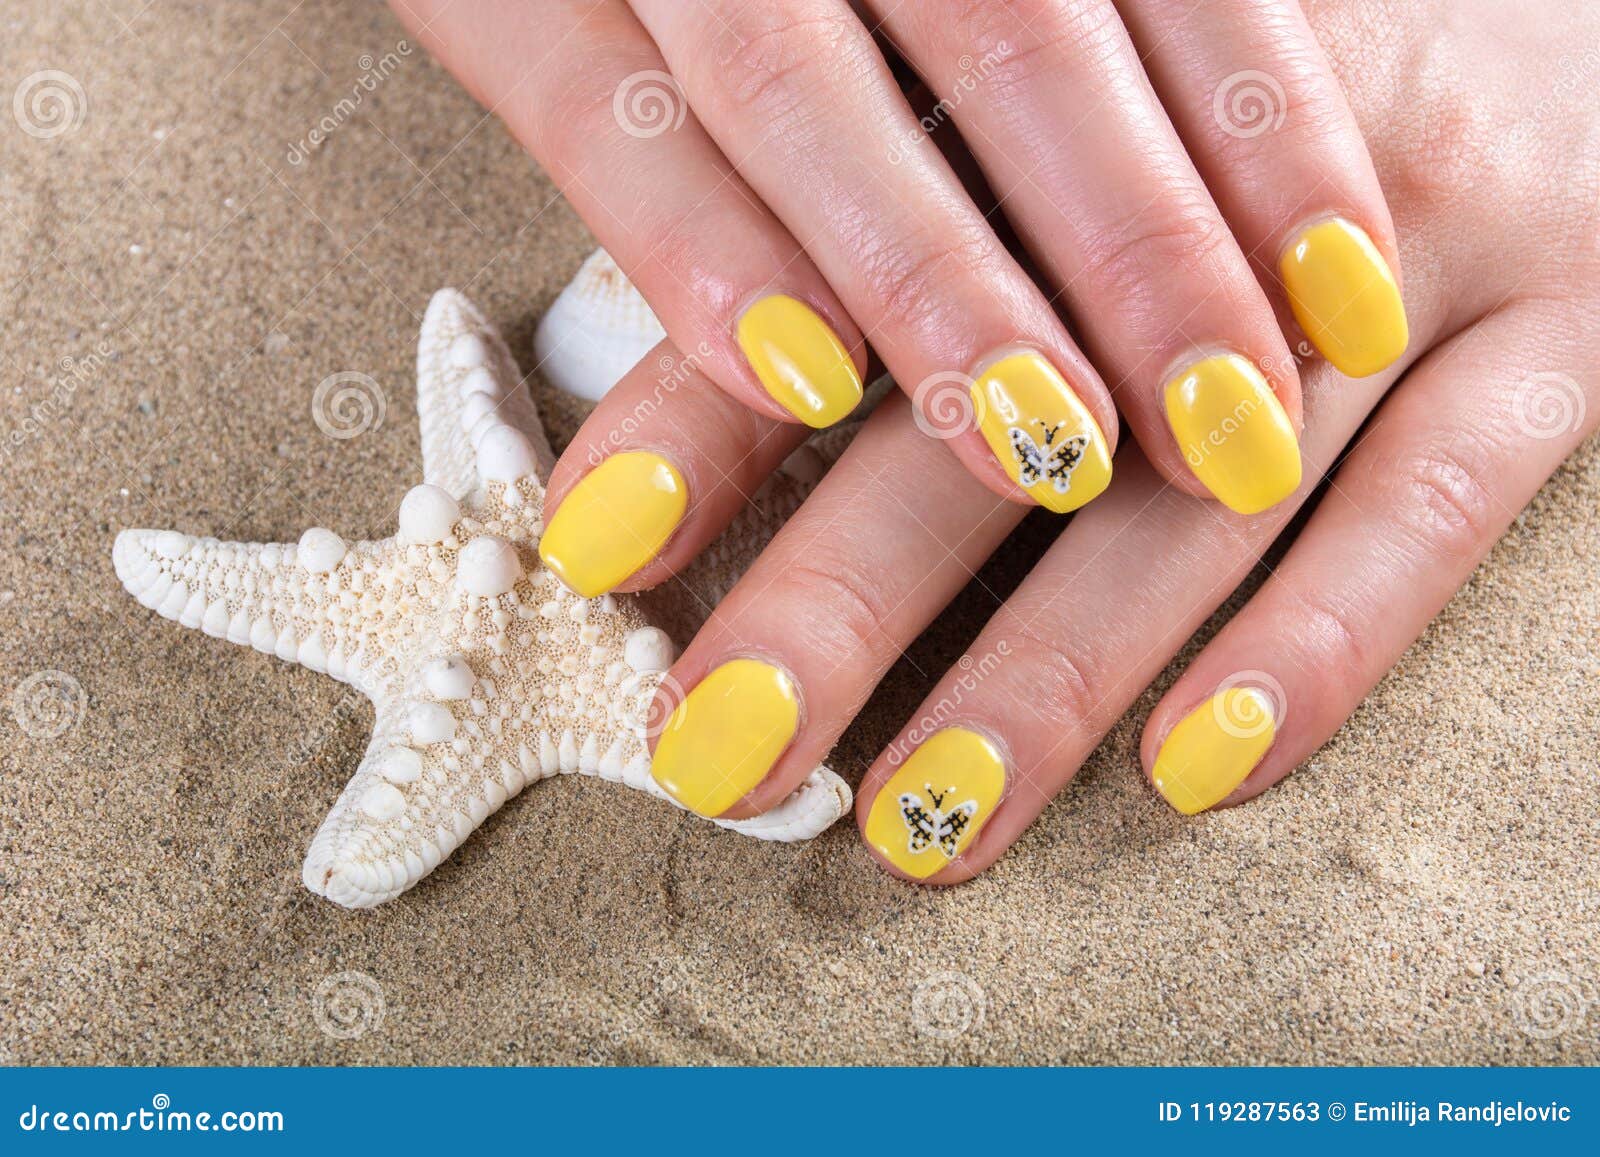 18,966 Nail Art Yellow Images, Stock Photos, 3D objects, & Vectors |  Shutterstock